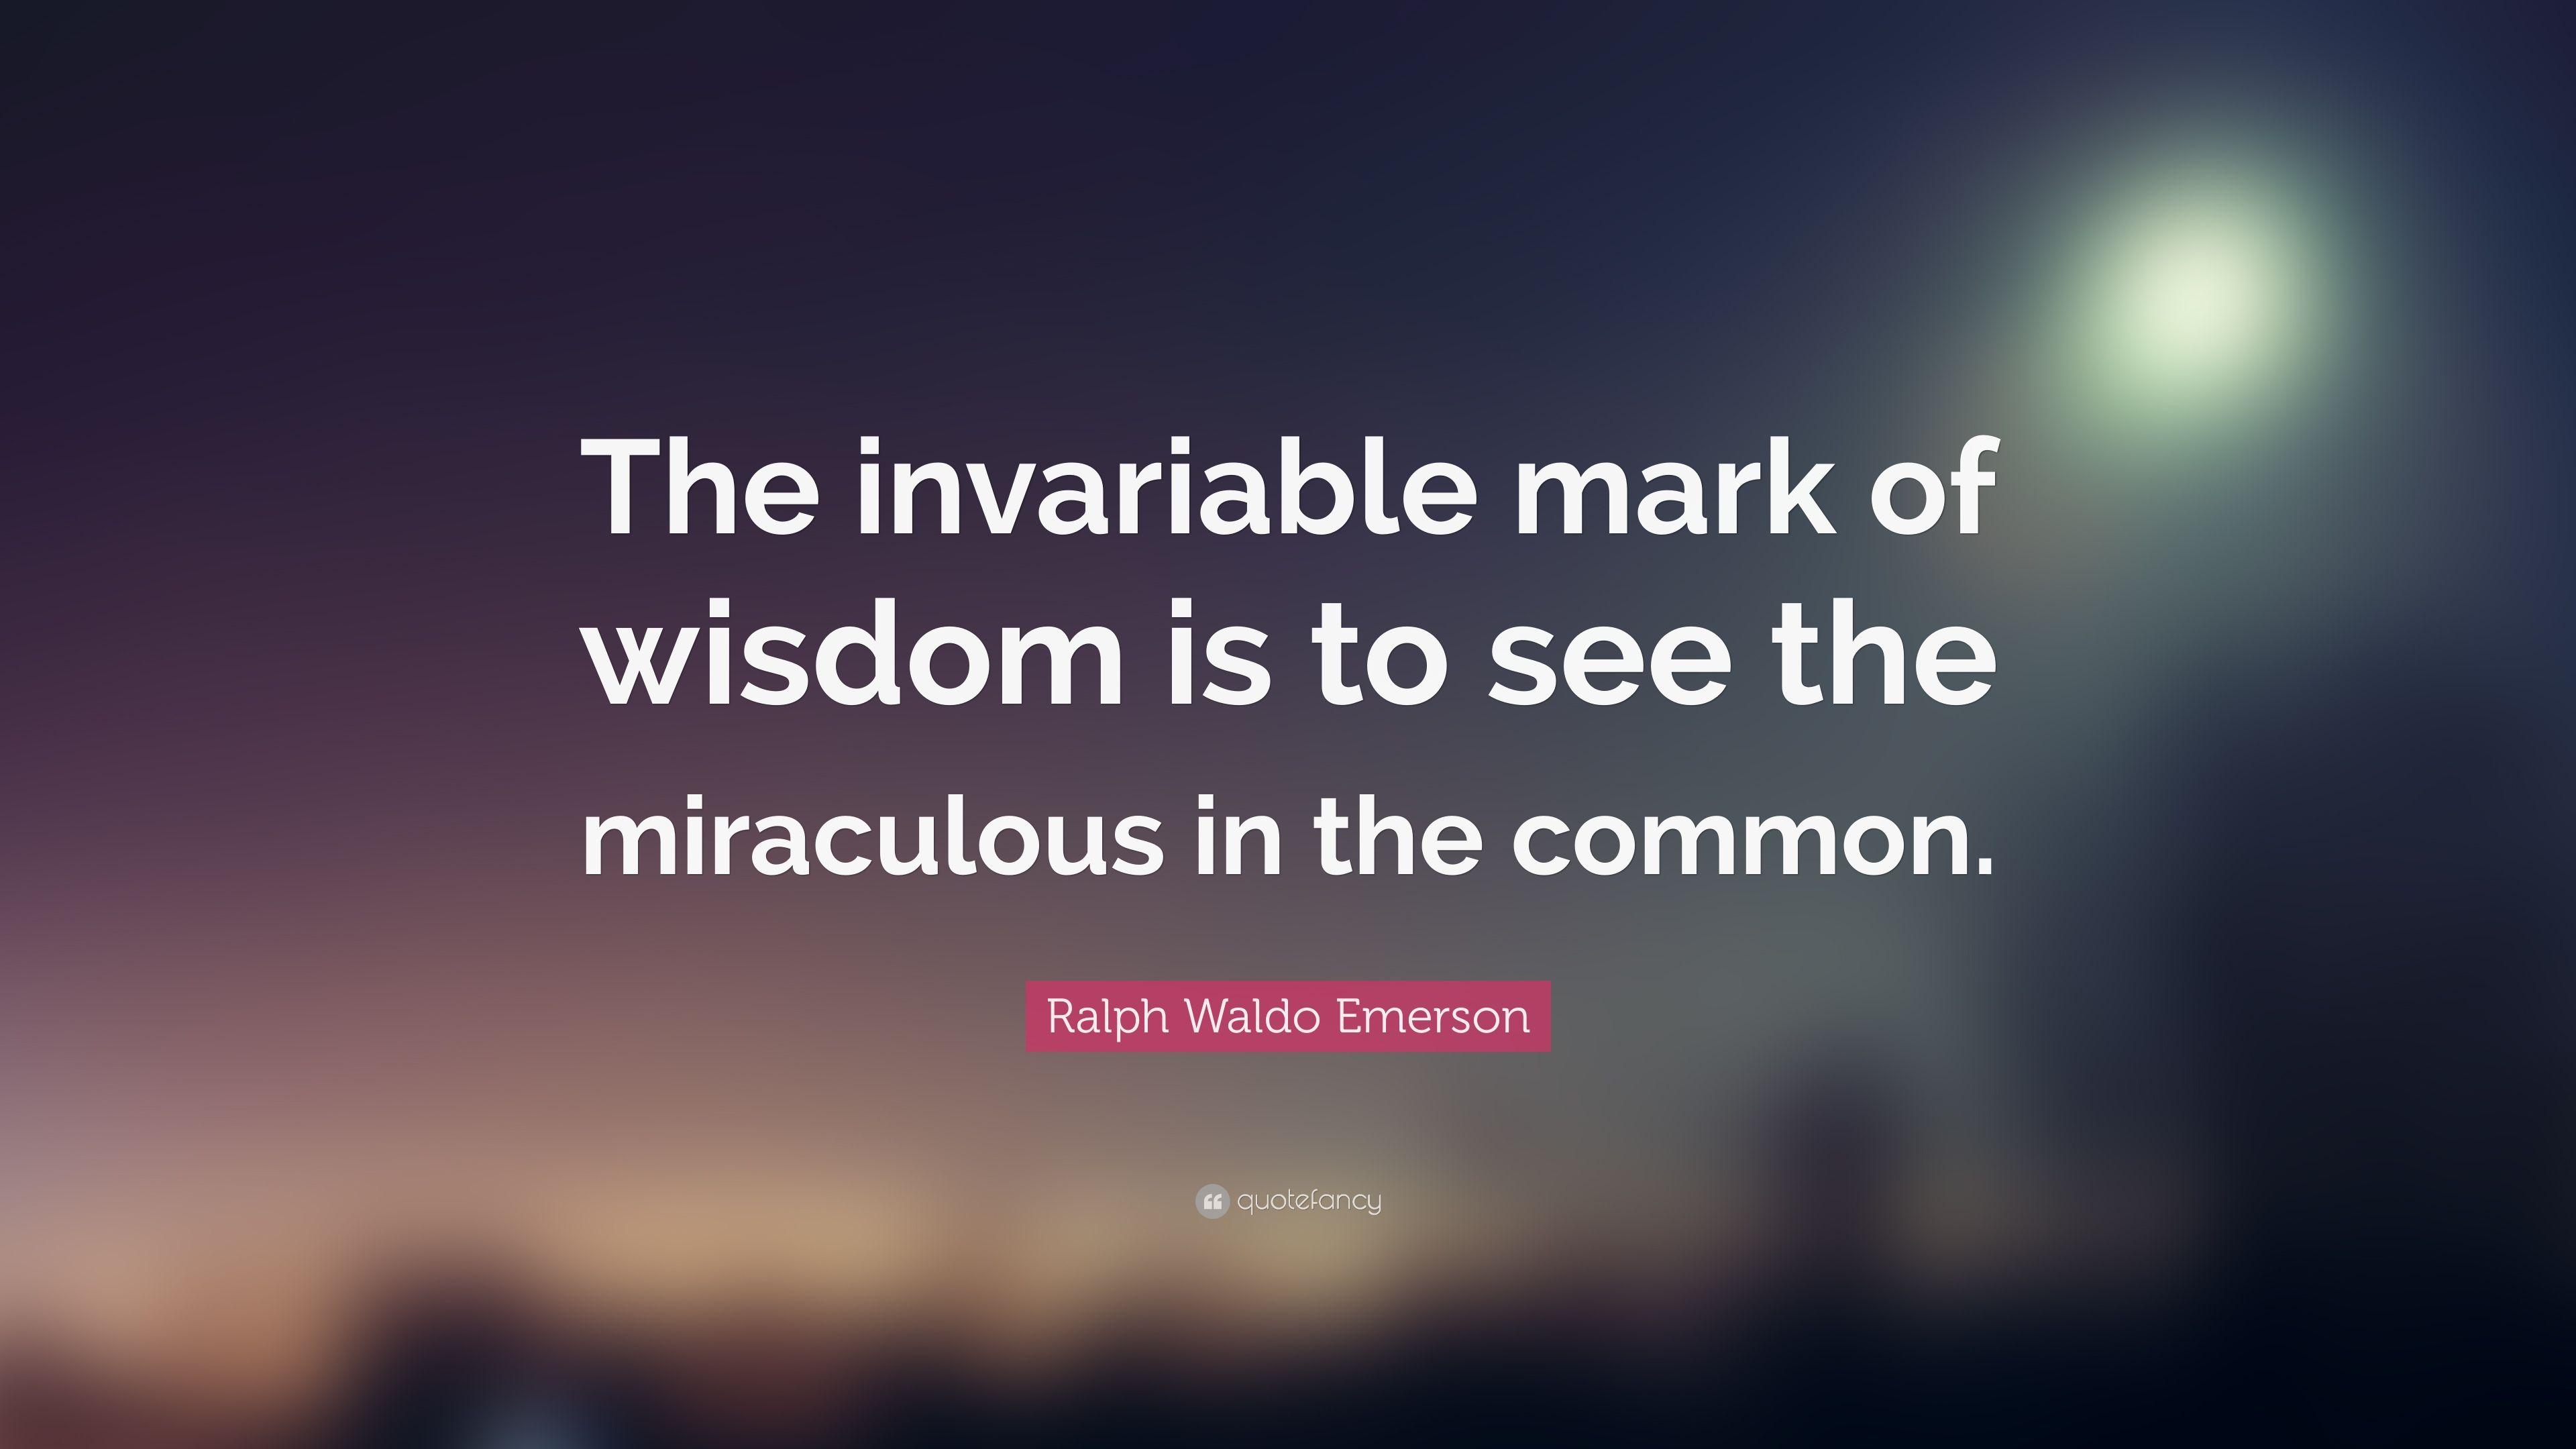 Ralph Waldo Emerson Quote: “The invariable mark of wisdom is to